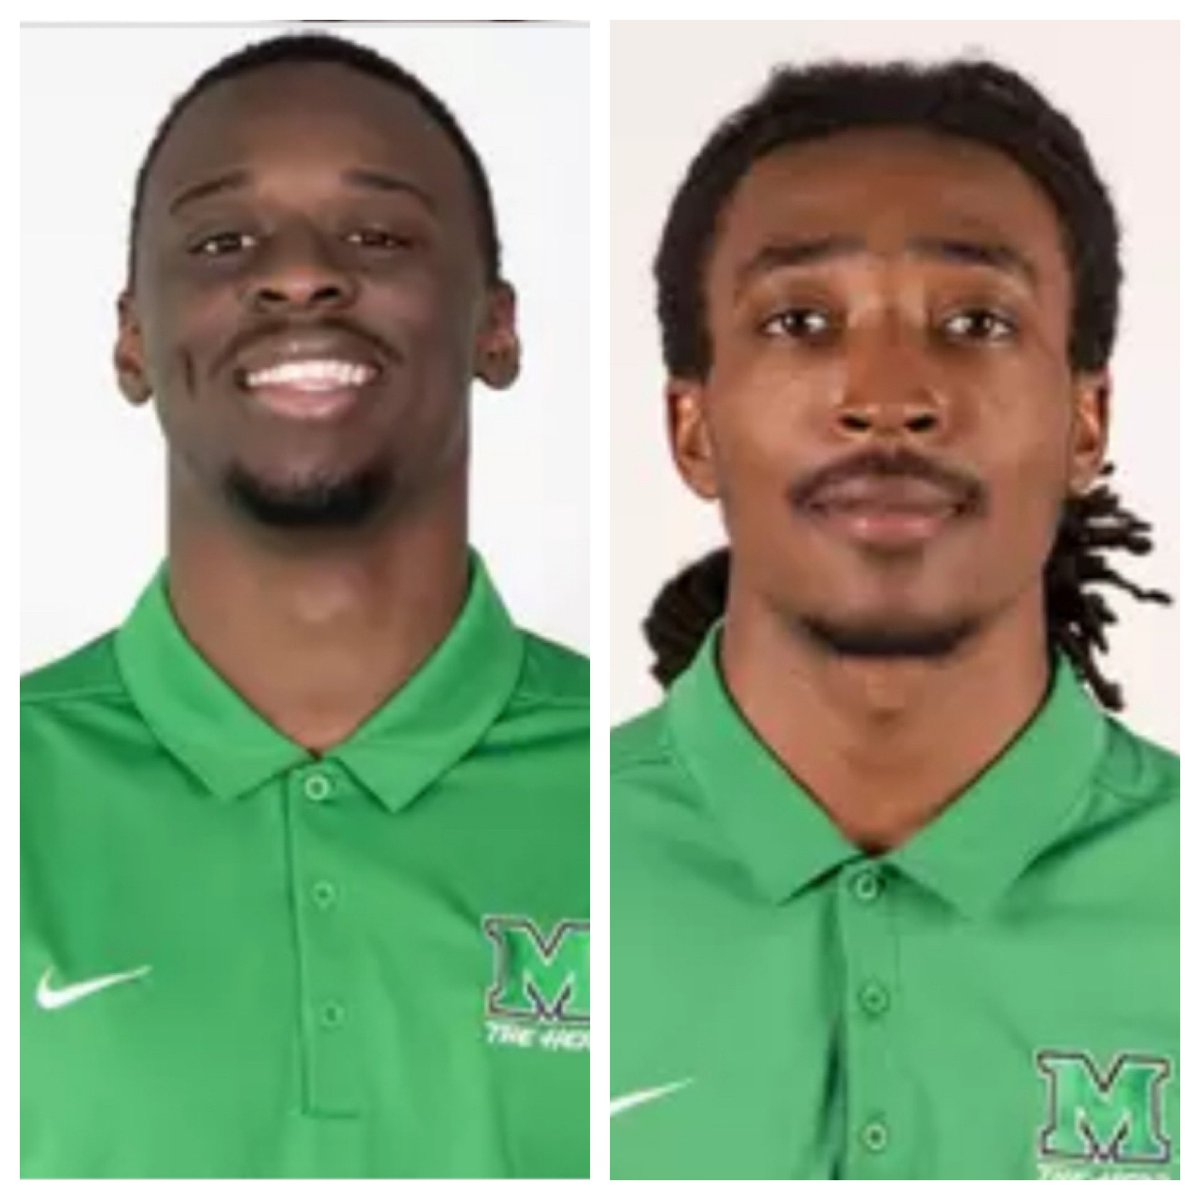 Wishing very best of luck to former @HerdFB greats @JohnsonNazeeh with @Chiefs and @toofyegilmore with @Lions as they are one win away from reaching @NFL Super Bowl LVIII. Proud of these young men that are great @marshallu representatives. #HerdFamily #OneHerd #HerdBrotherhood